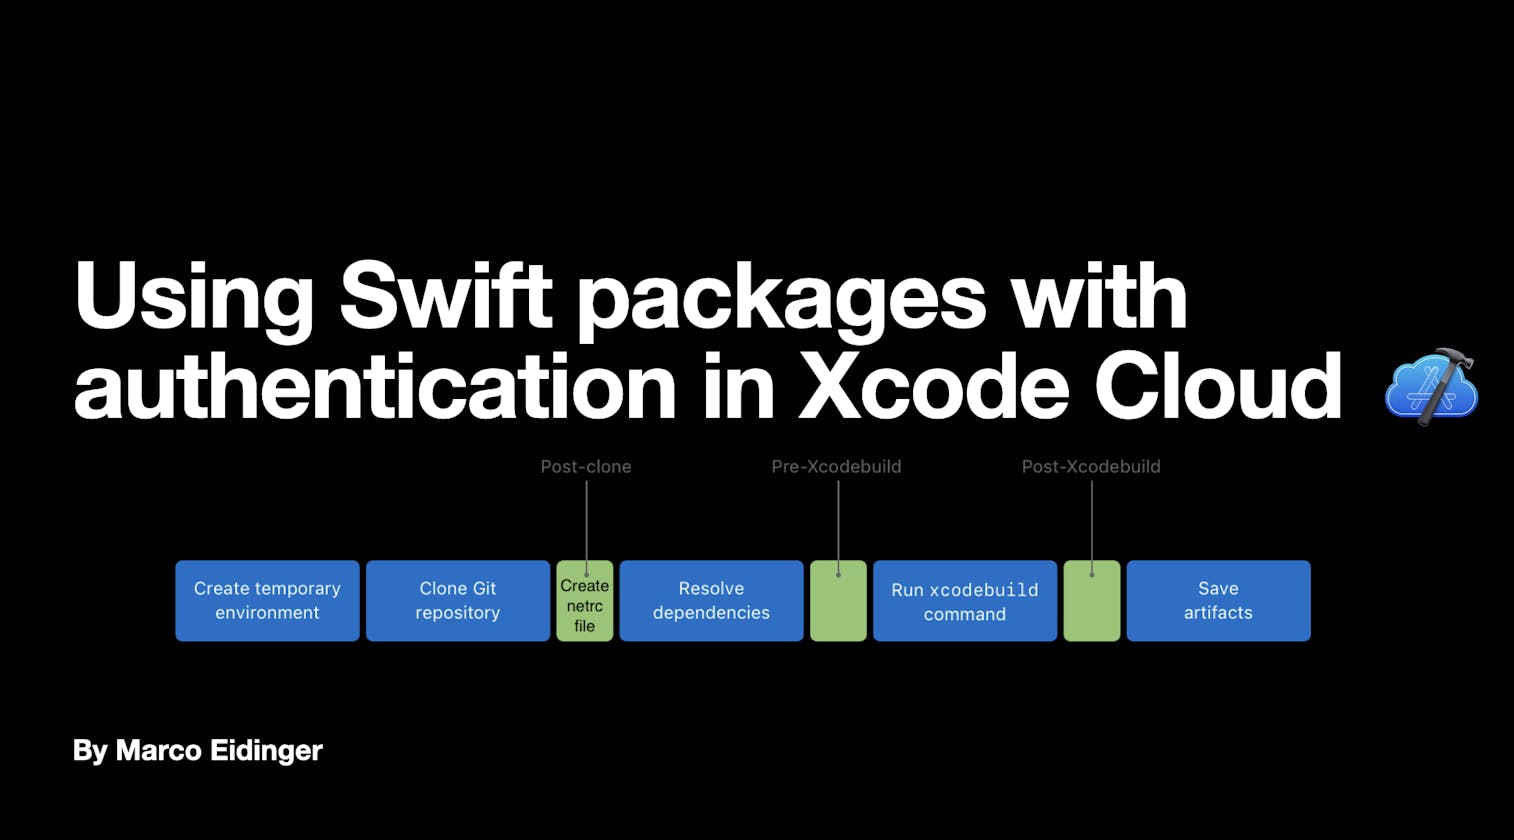 Using Swift packages with authentication in Xcode Cloud